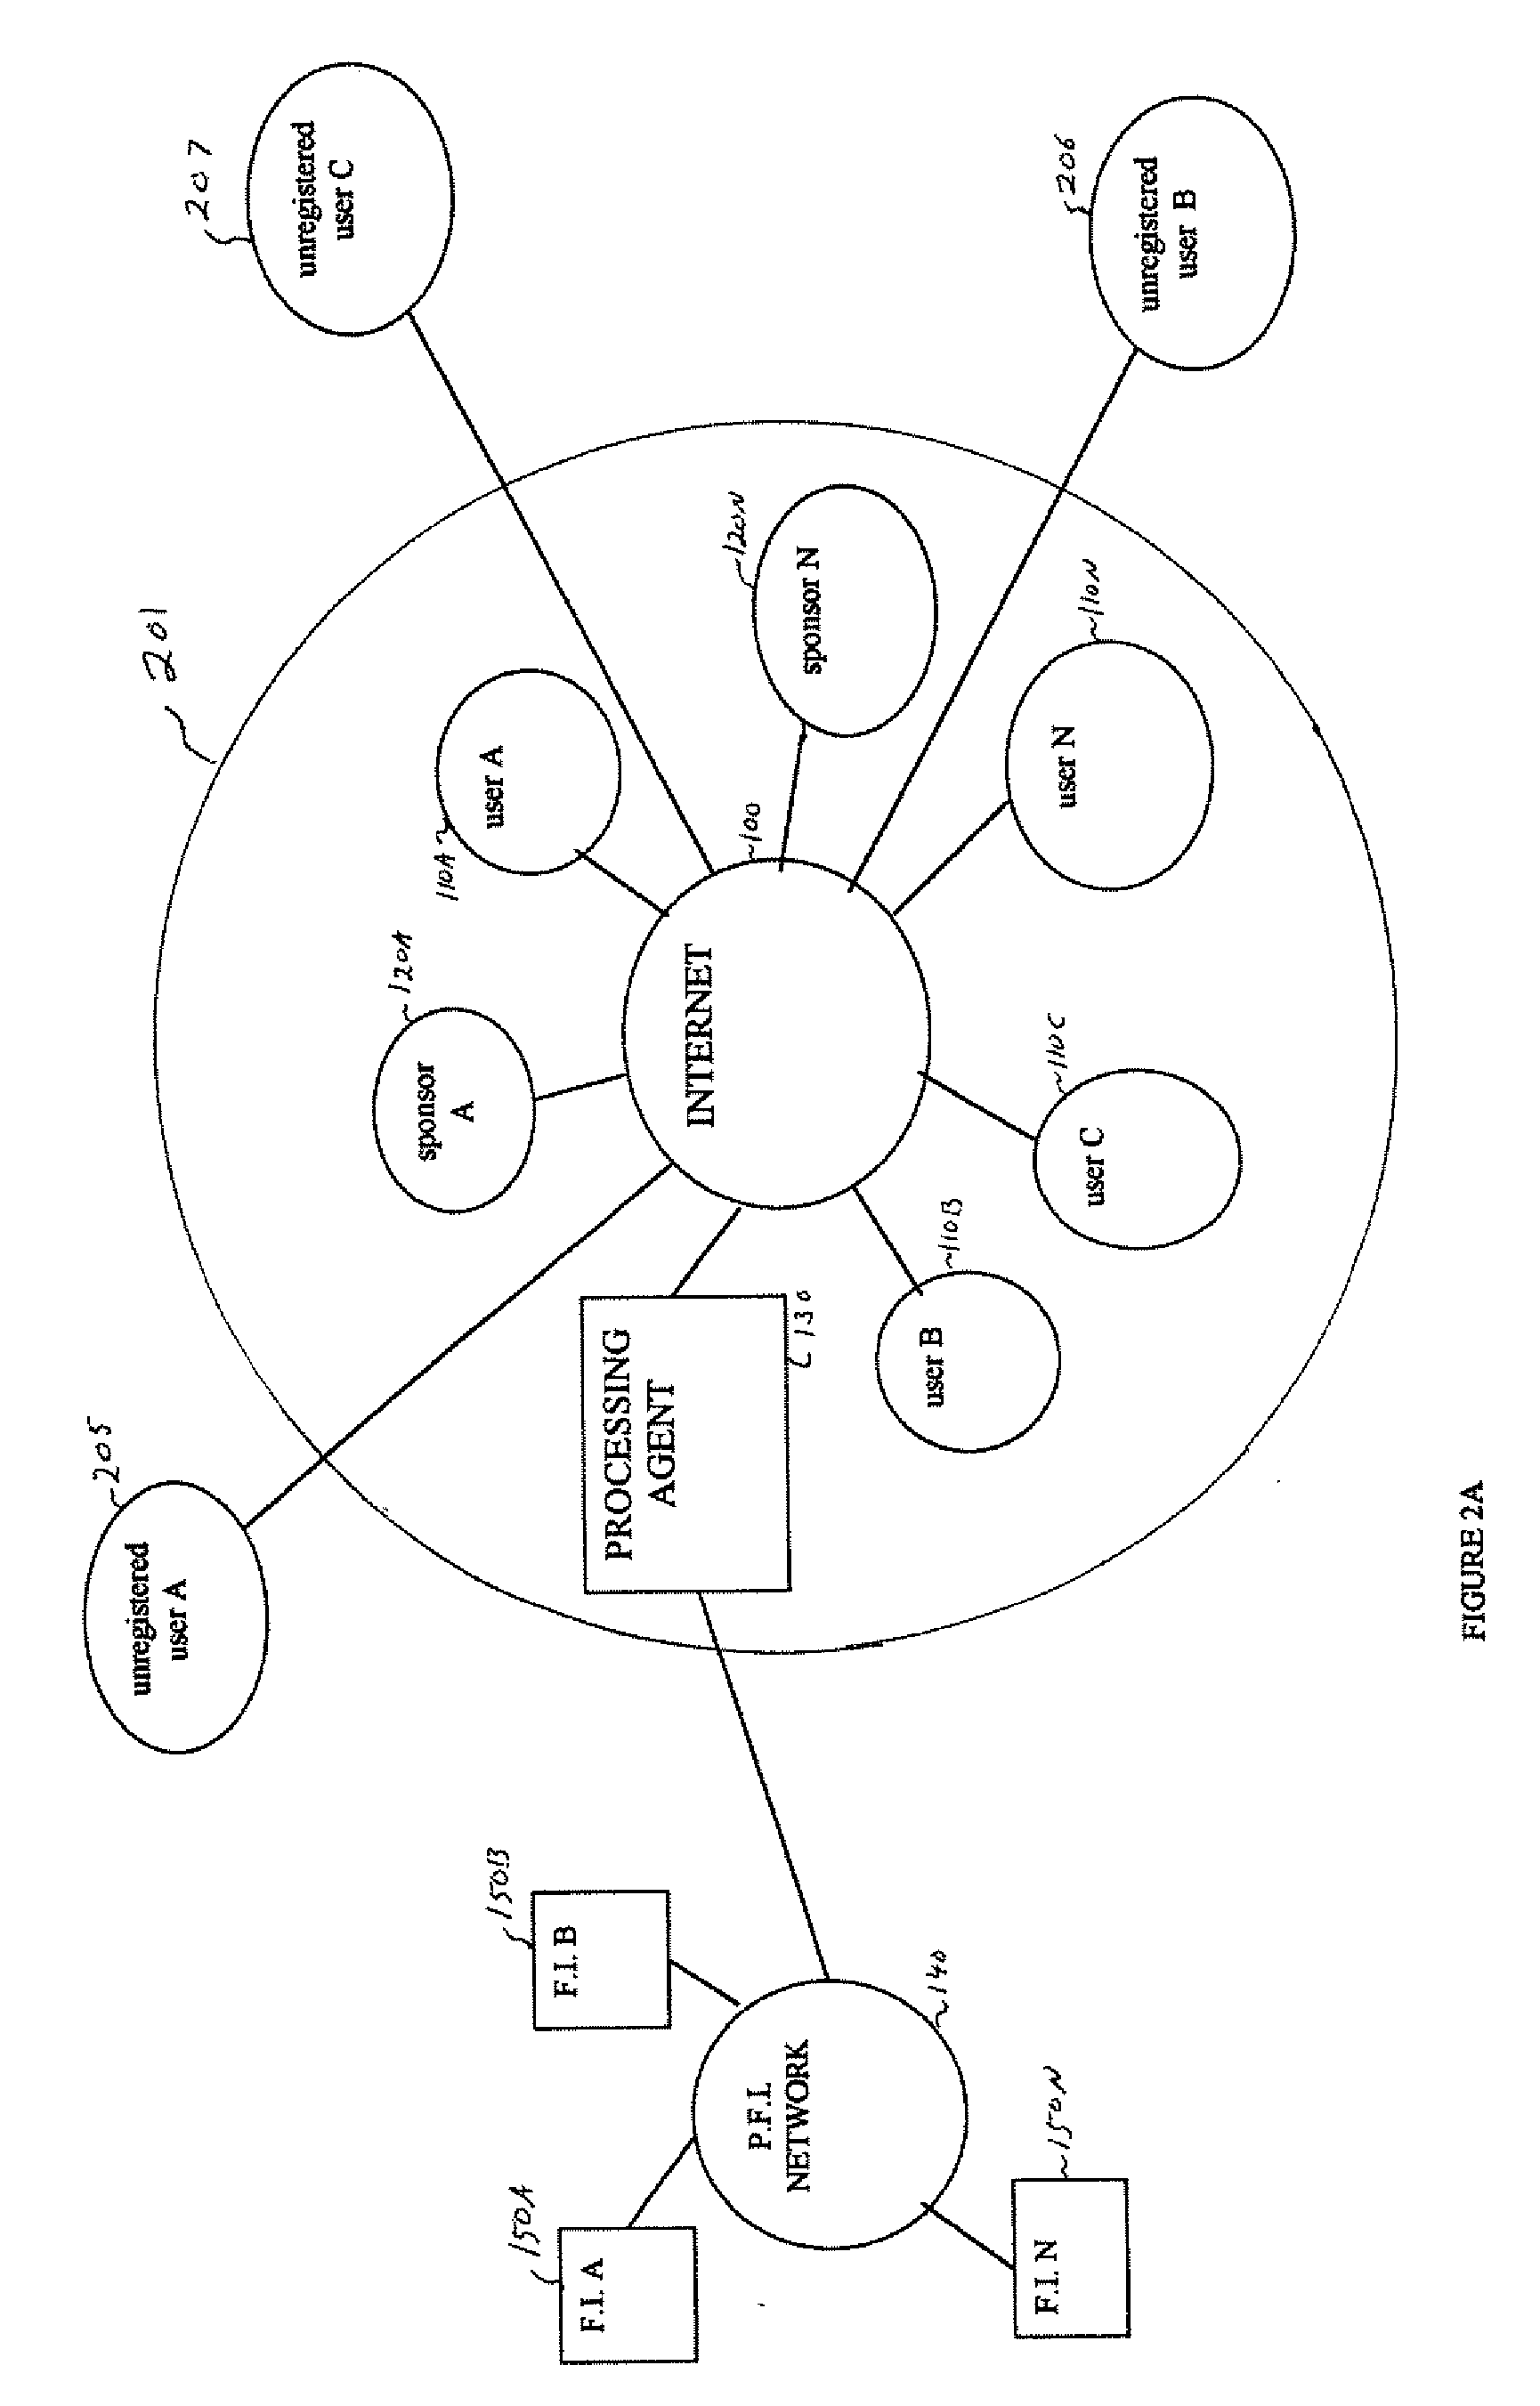 Systems and Methods for Hold Periods Based Upon Risk Analysis